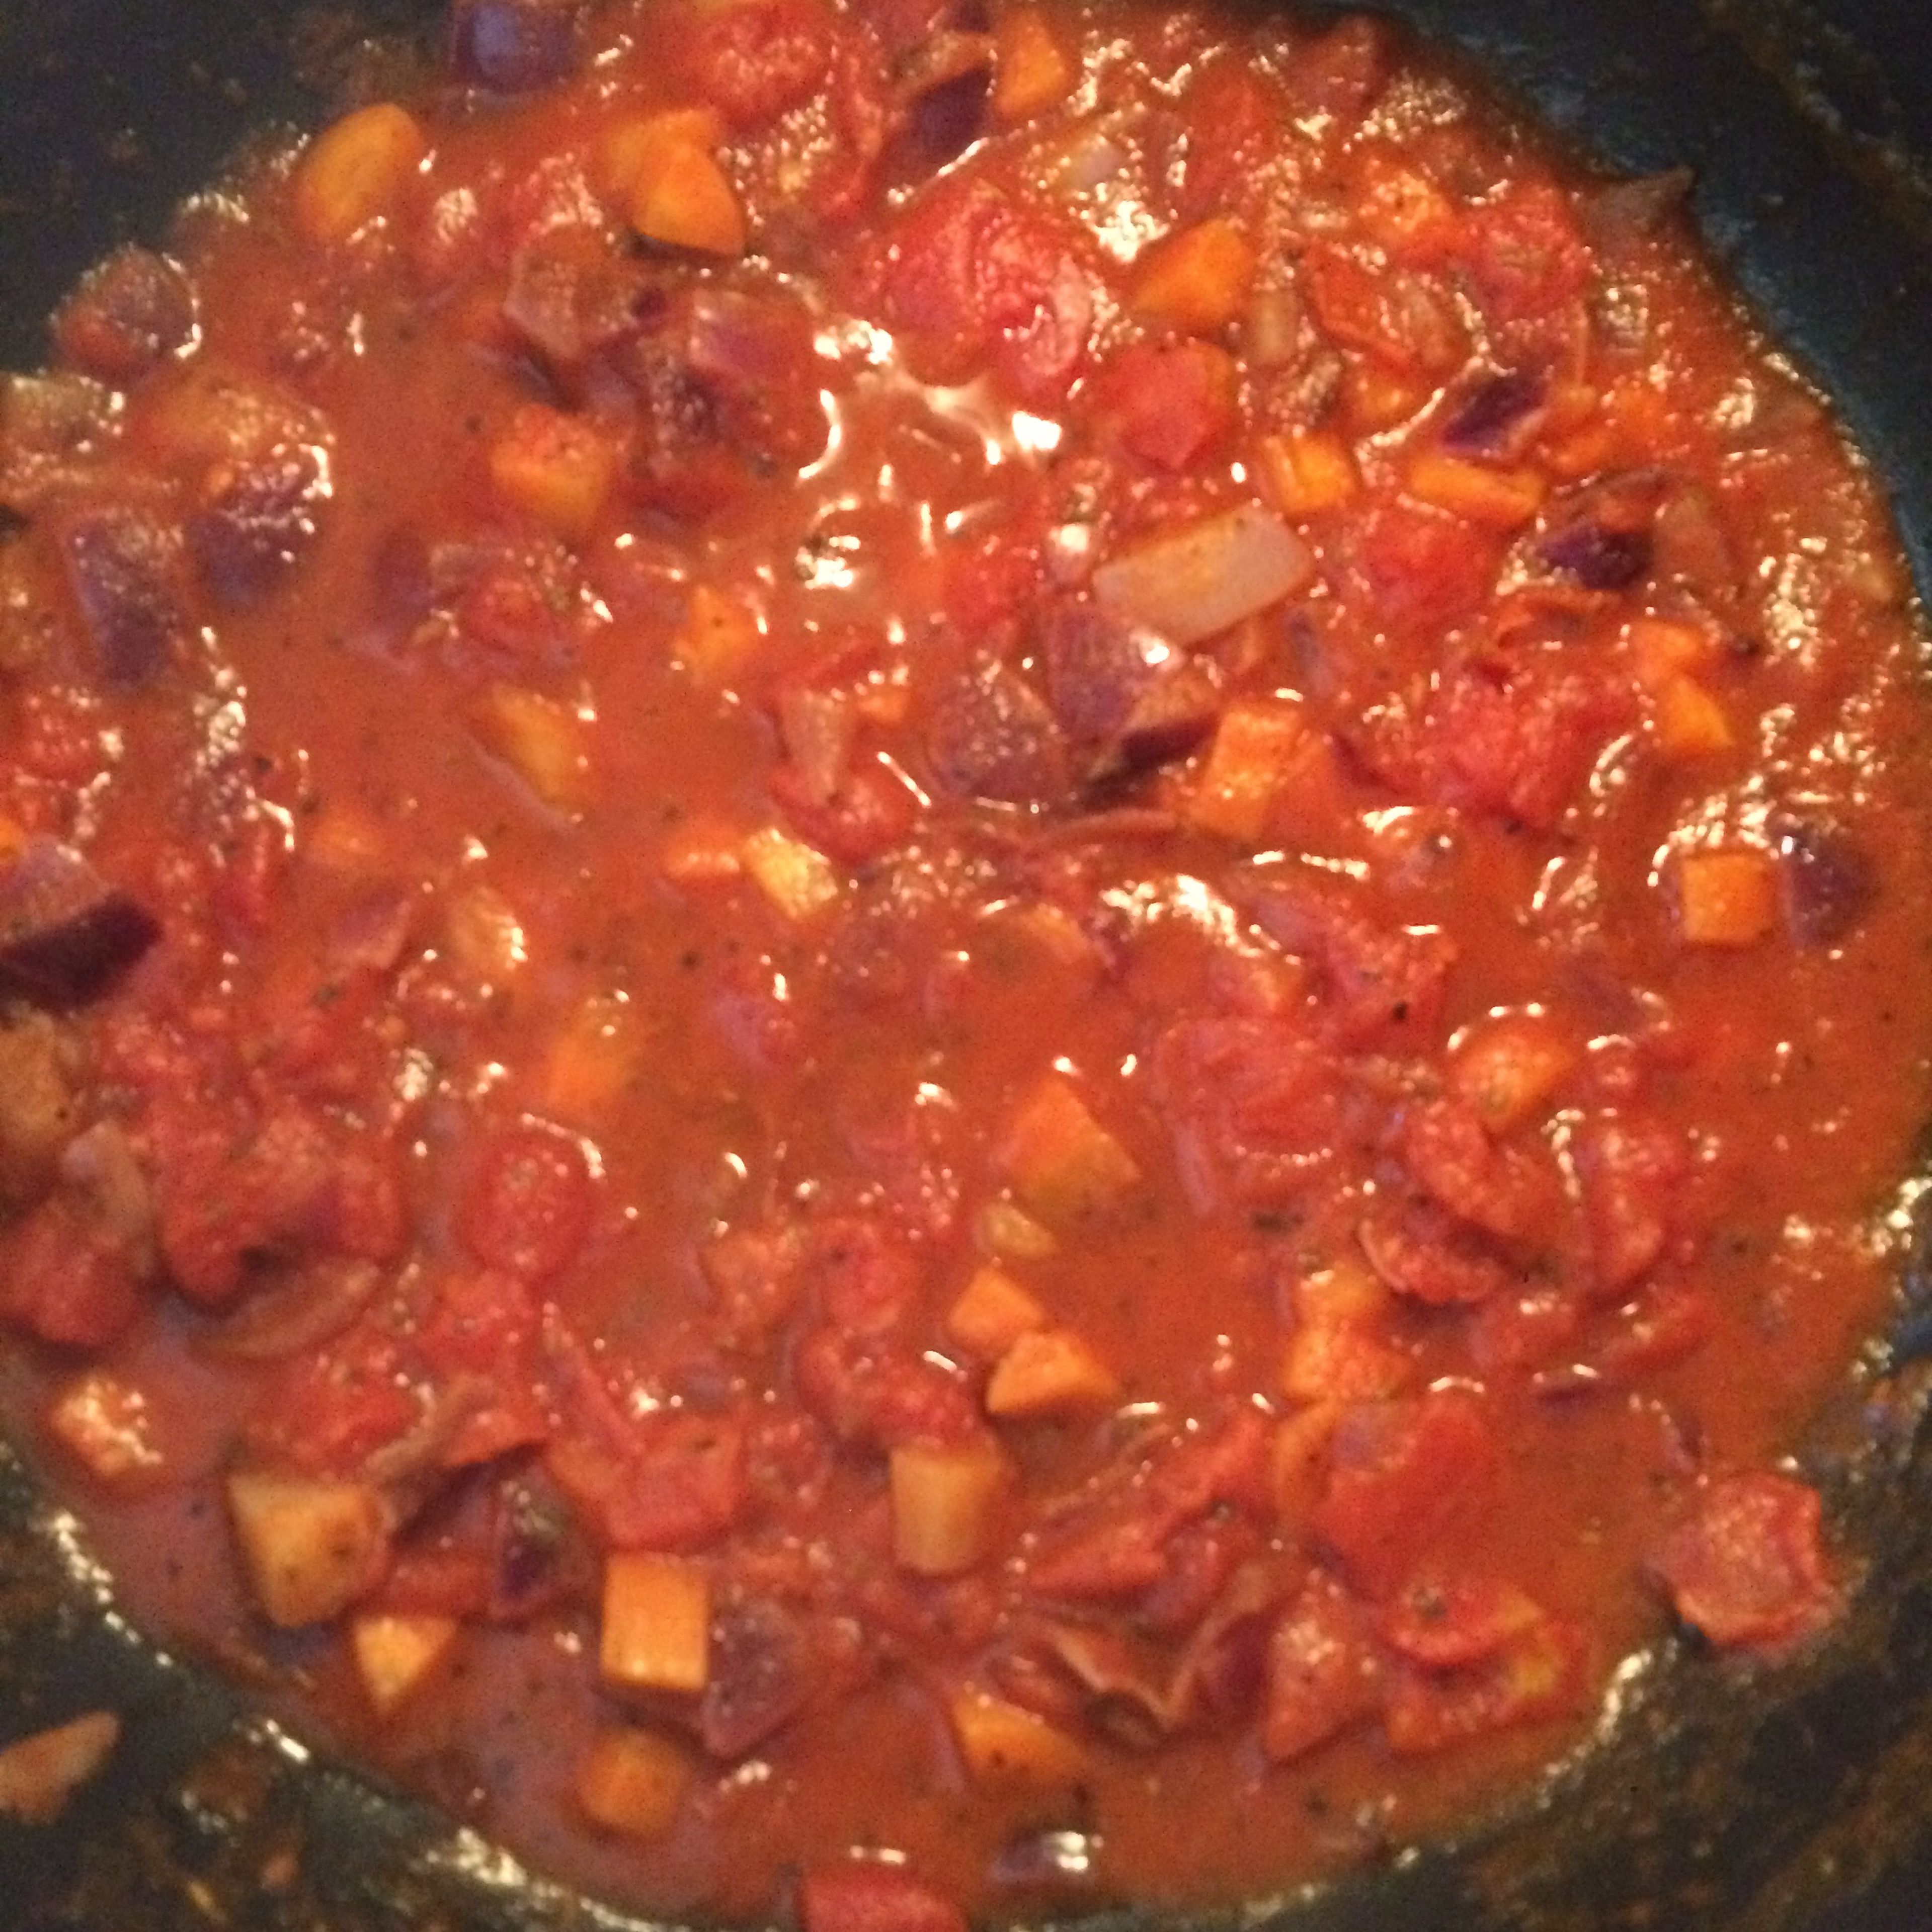 Add tomato sauce, salt and curry. Cook over low heat for 30 minute